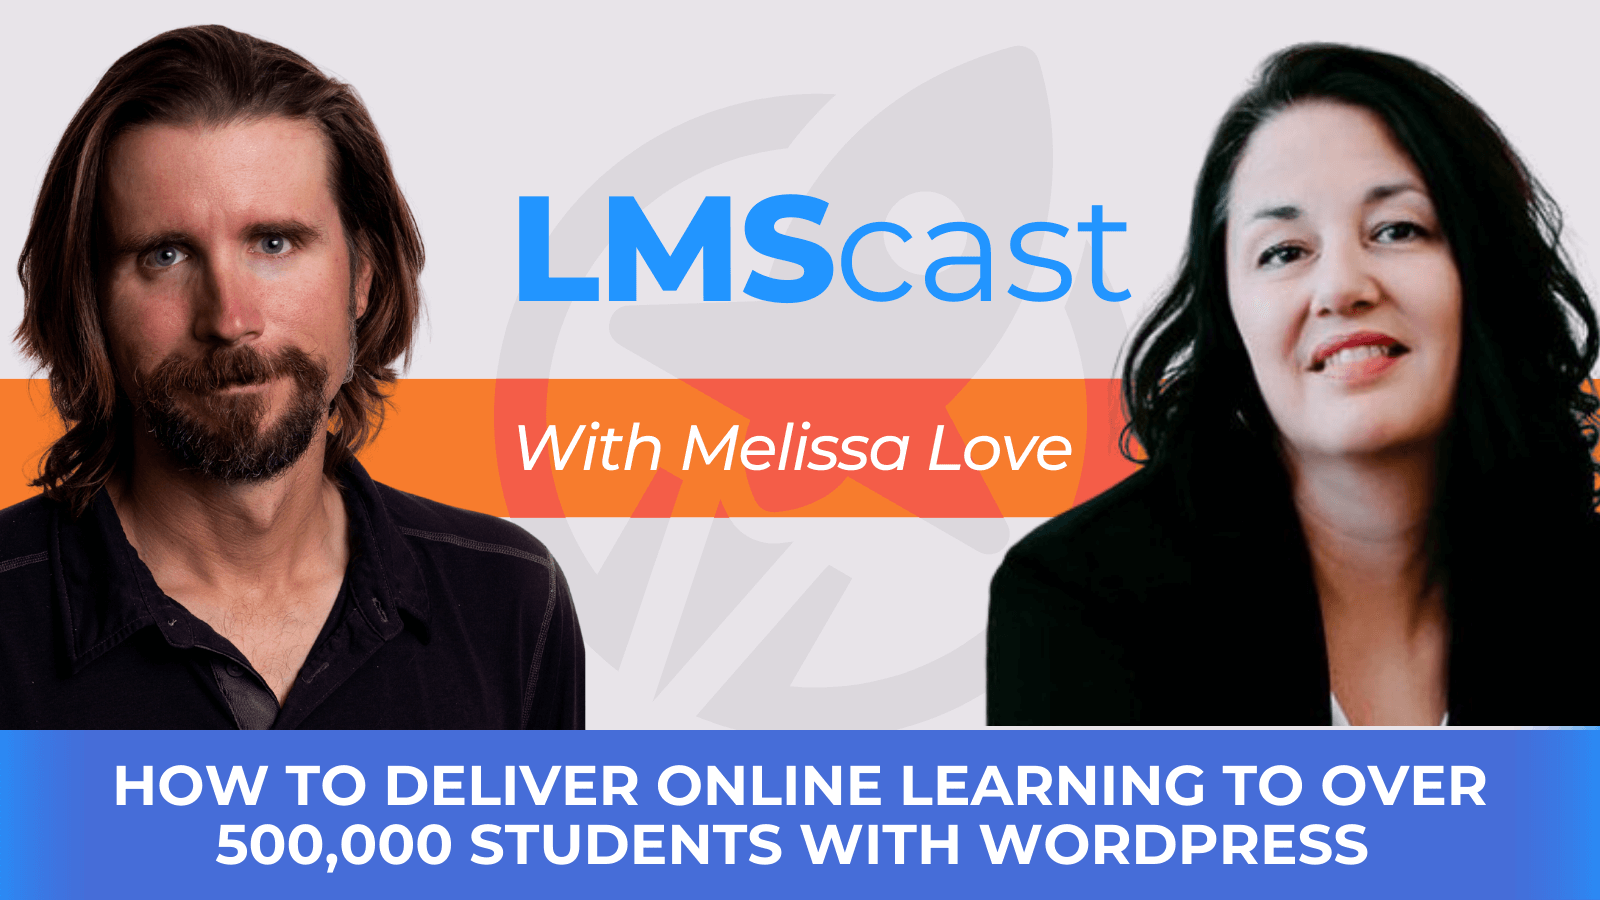 How to Deliver Online Learning to Over 500,000 Students with WordPress